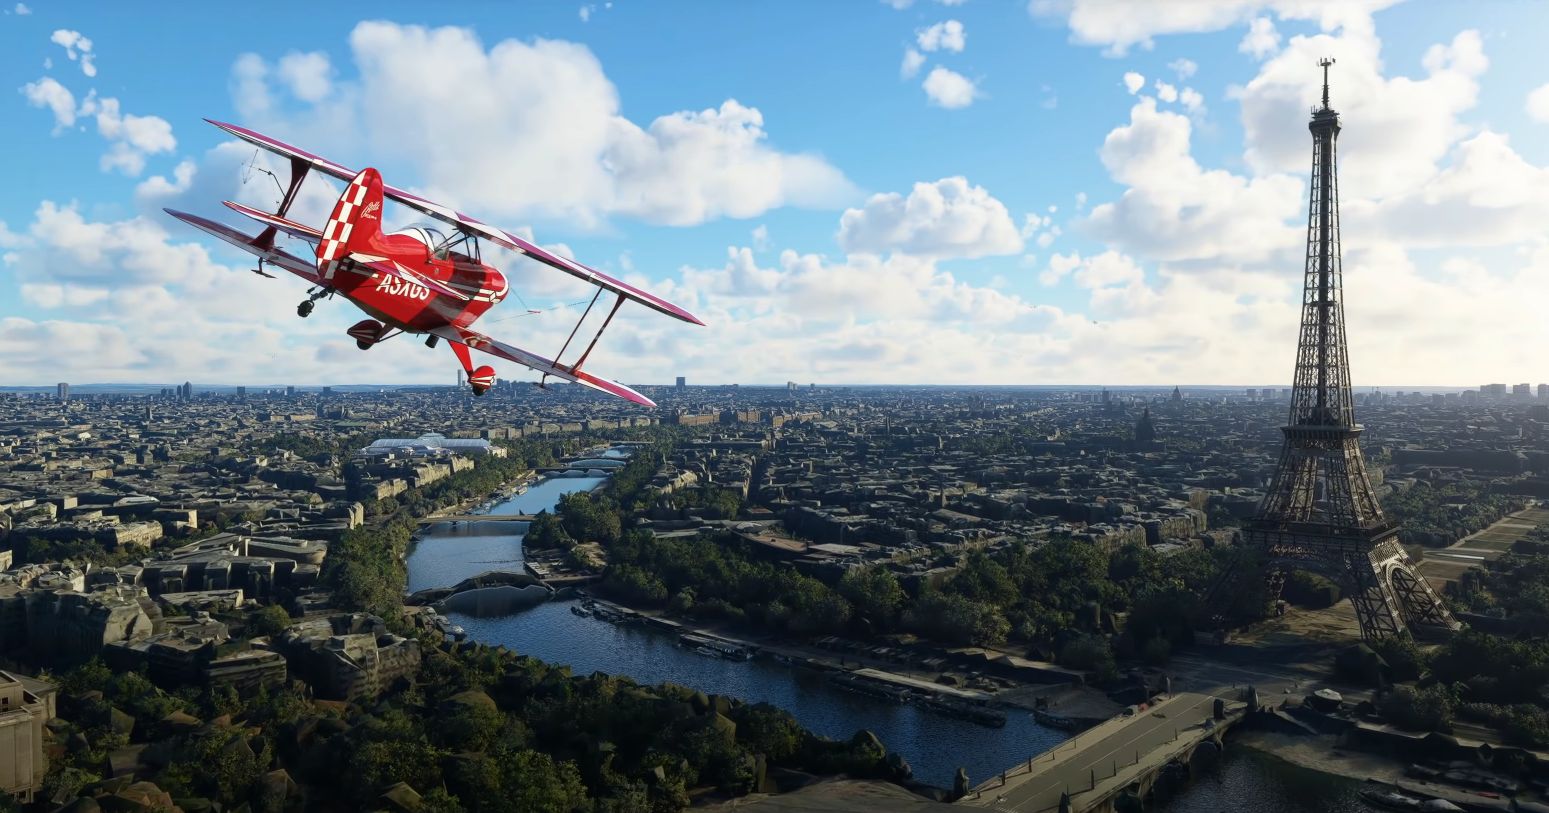  France and Benelux look fancy in new Microsoft Flight Simulator world update 